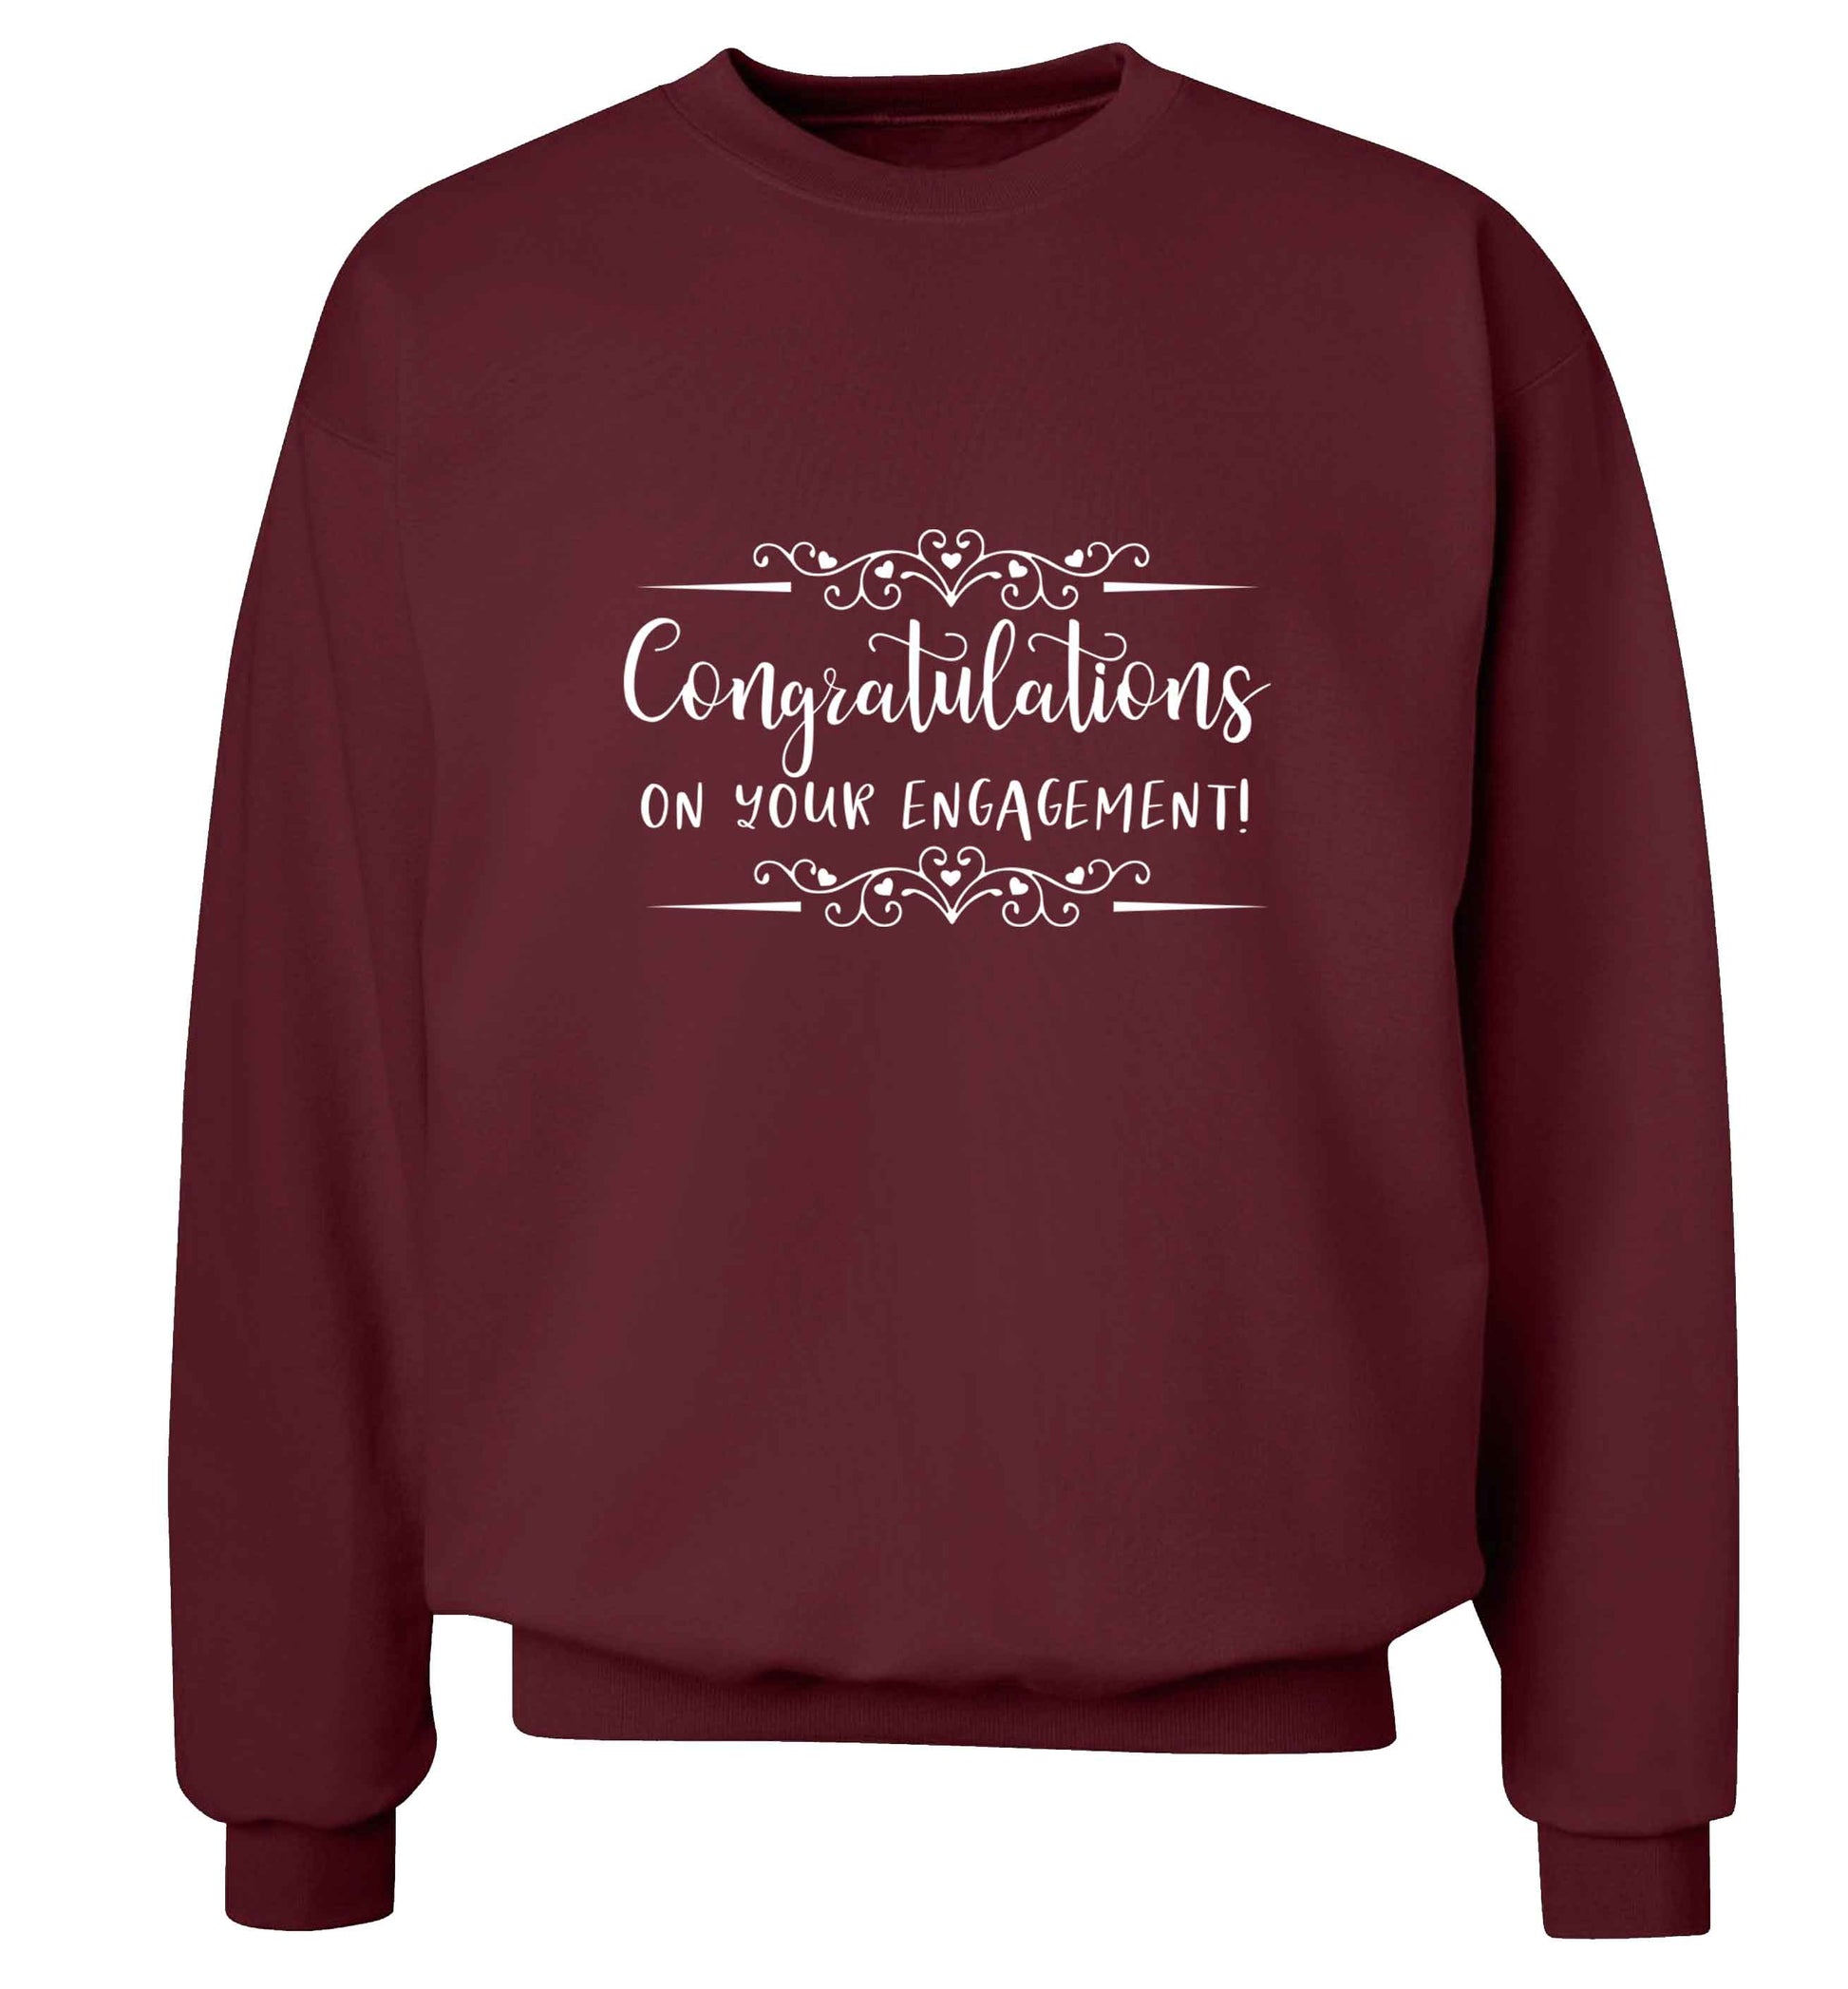 Congratulations on your engagement adult's unisex maroon sweater 2XL